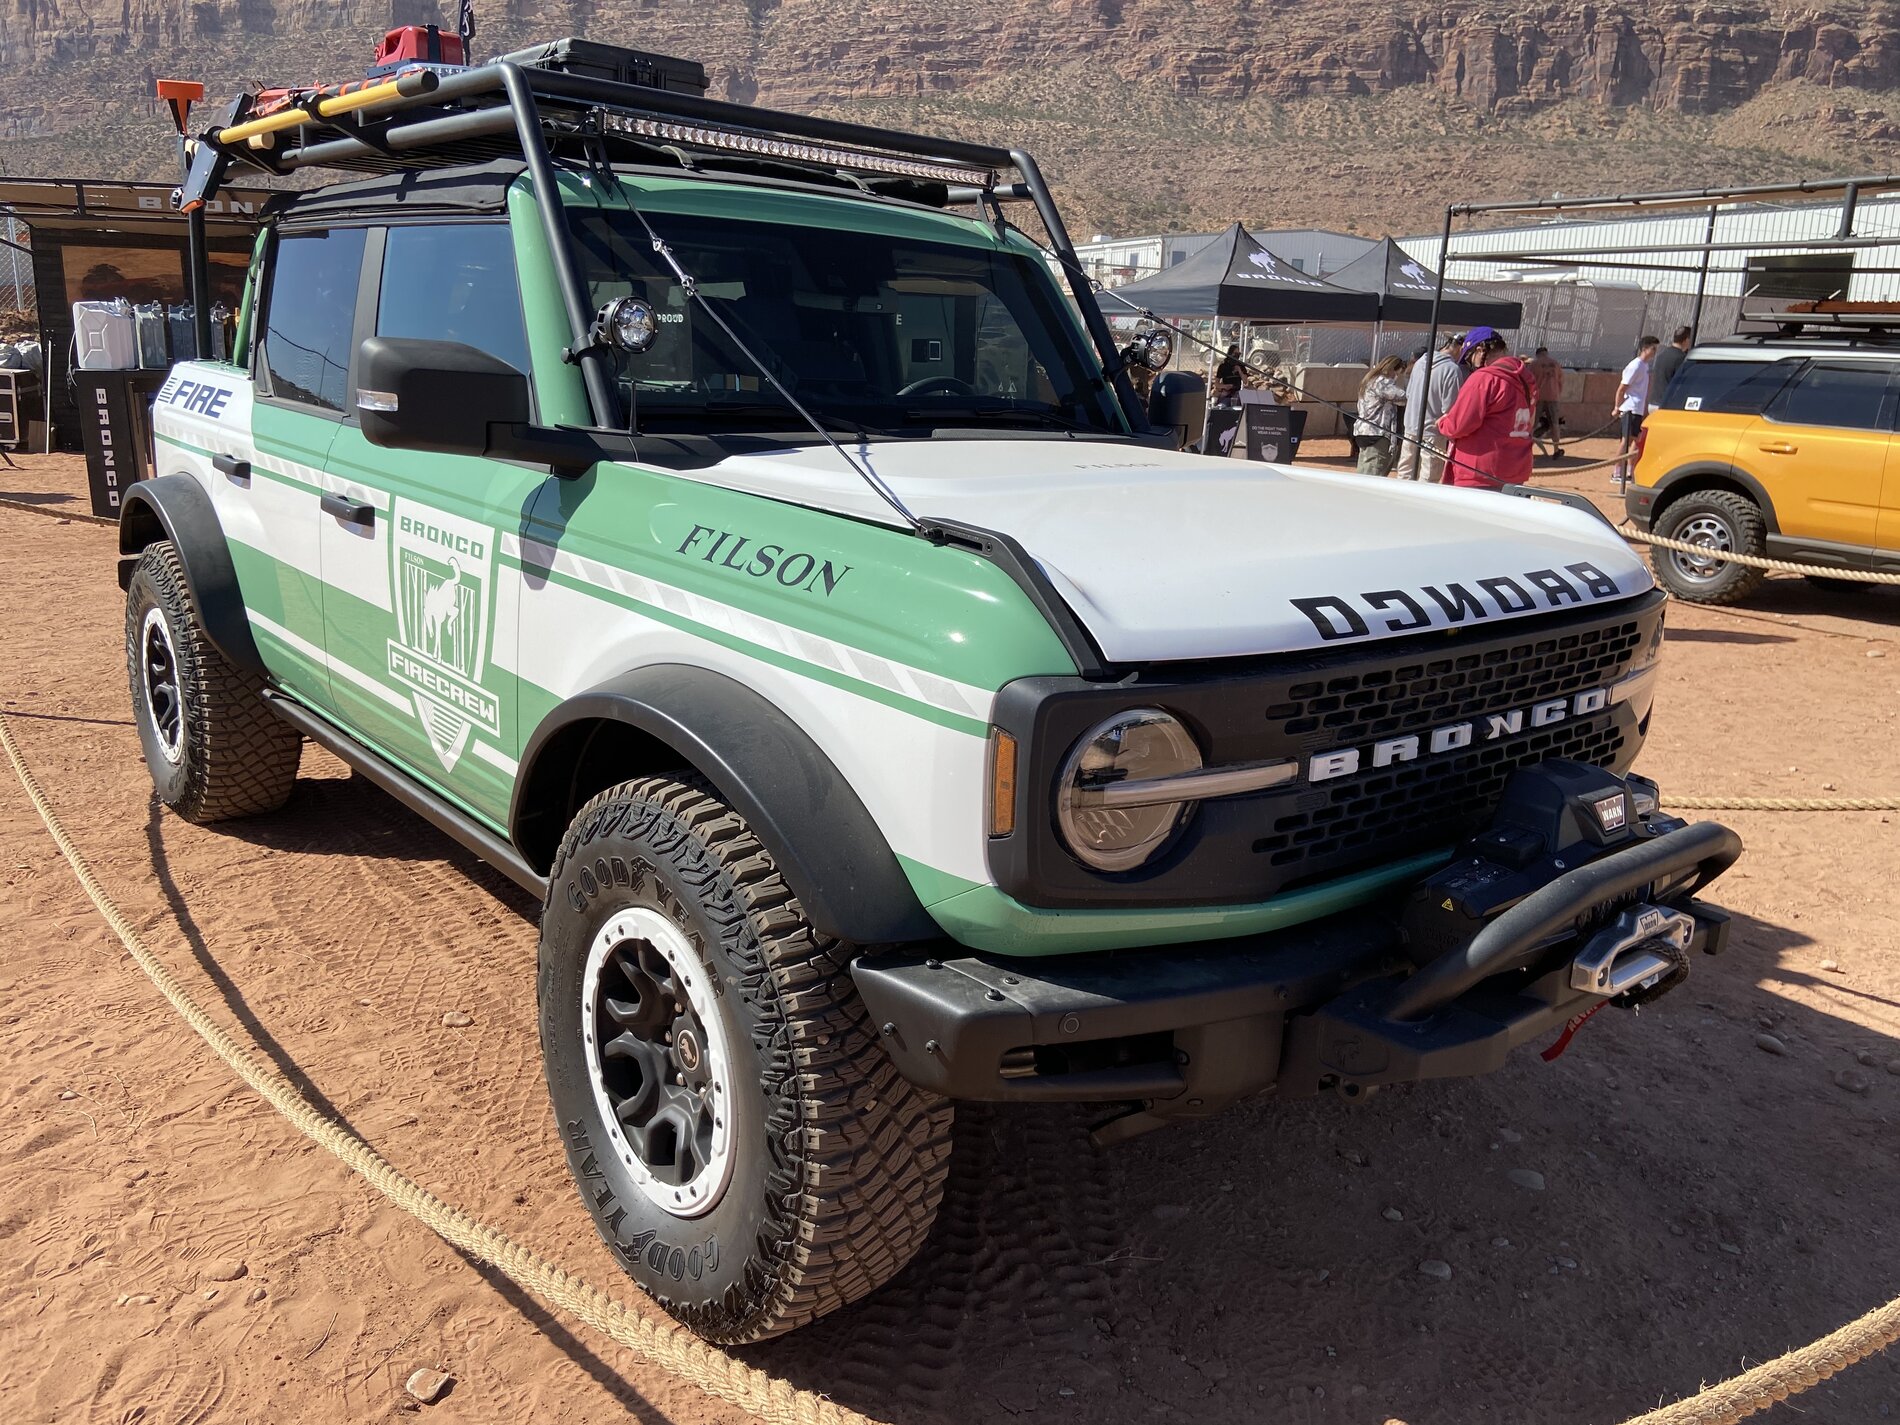 Ford Bronco Another Moab Demo Takeaway 7B16EBCC-F039-4C7C-9C3C-9440D53FD9D4